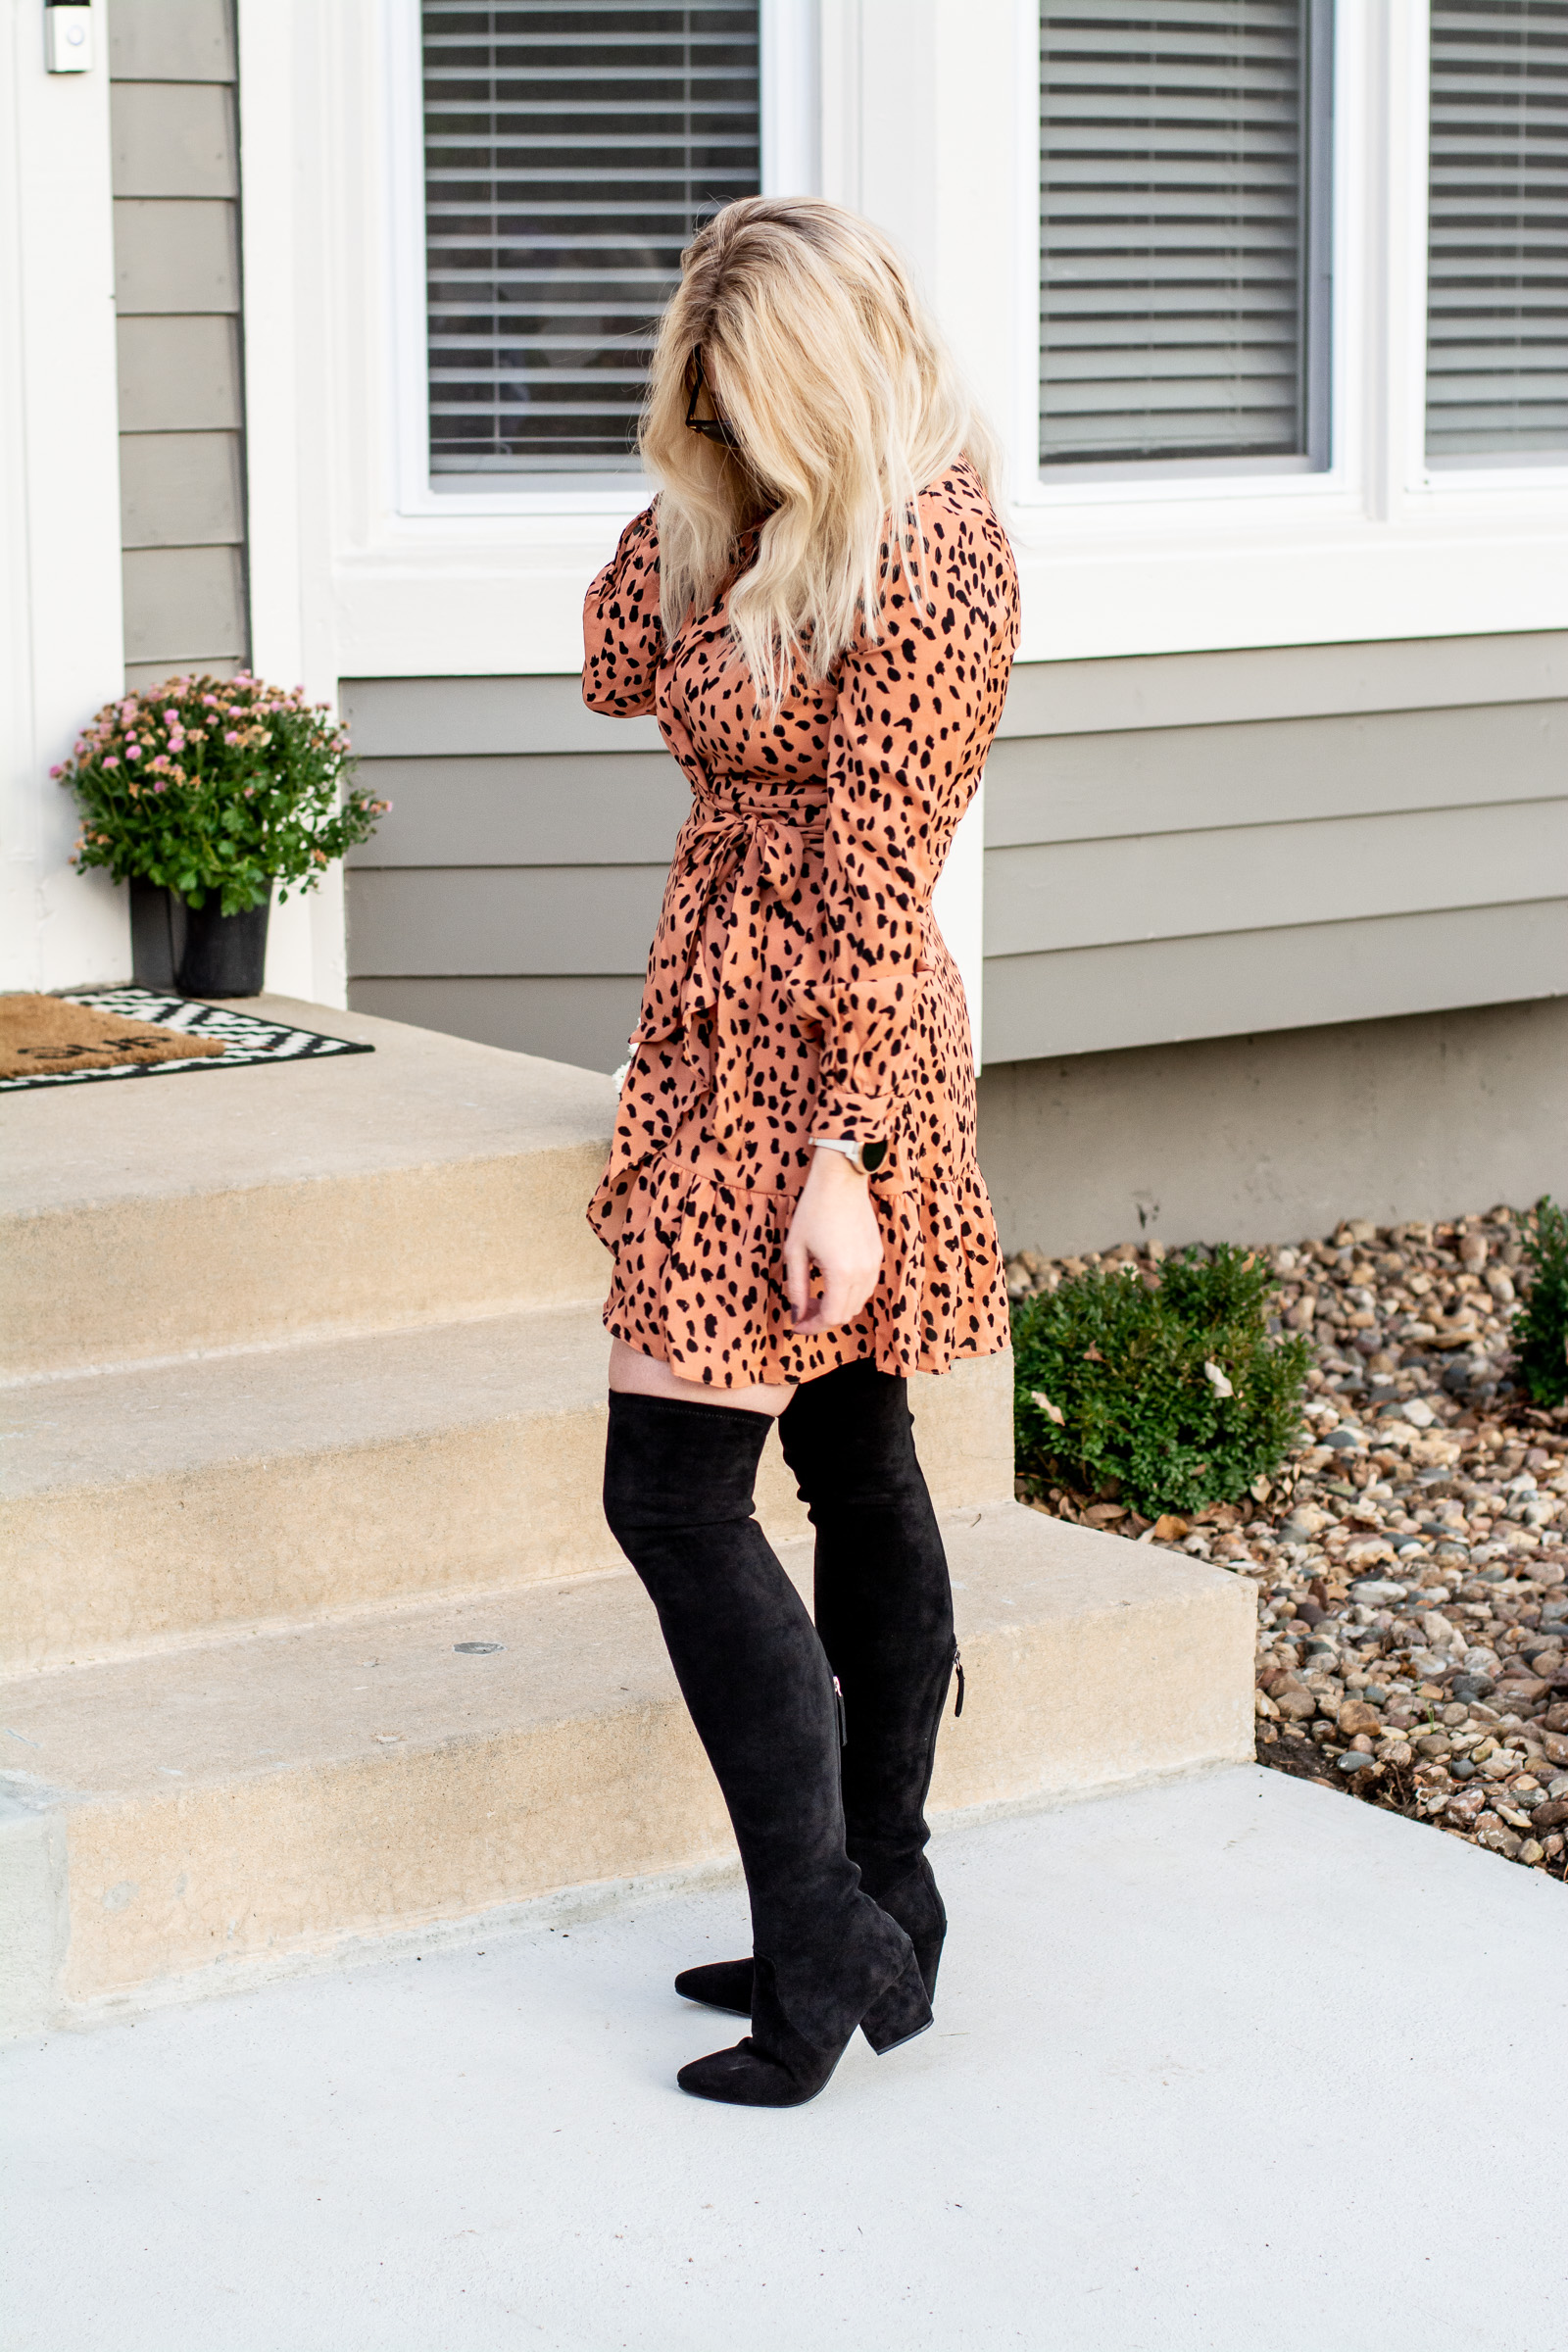 Holiday Outfit: Leopard Dress + Tall Boots. | LSR